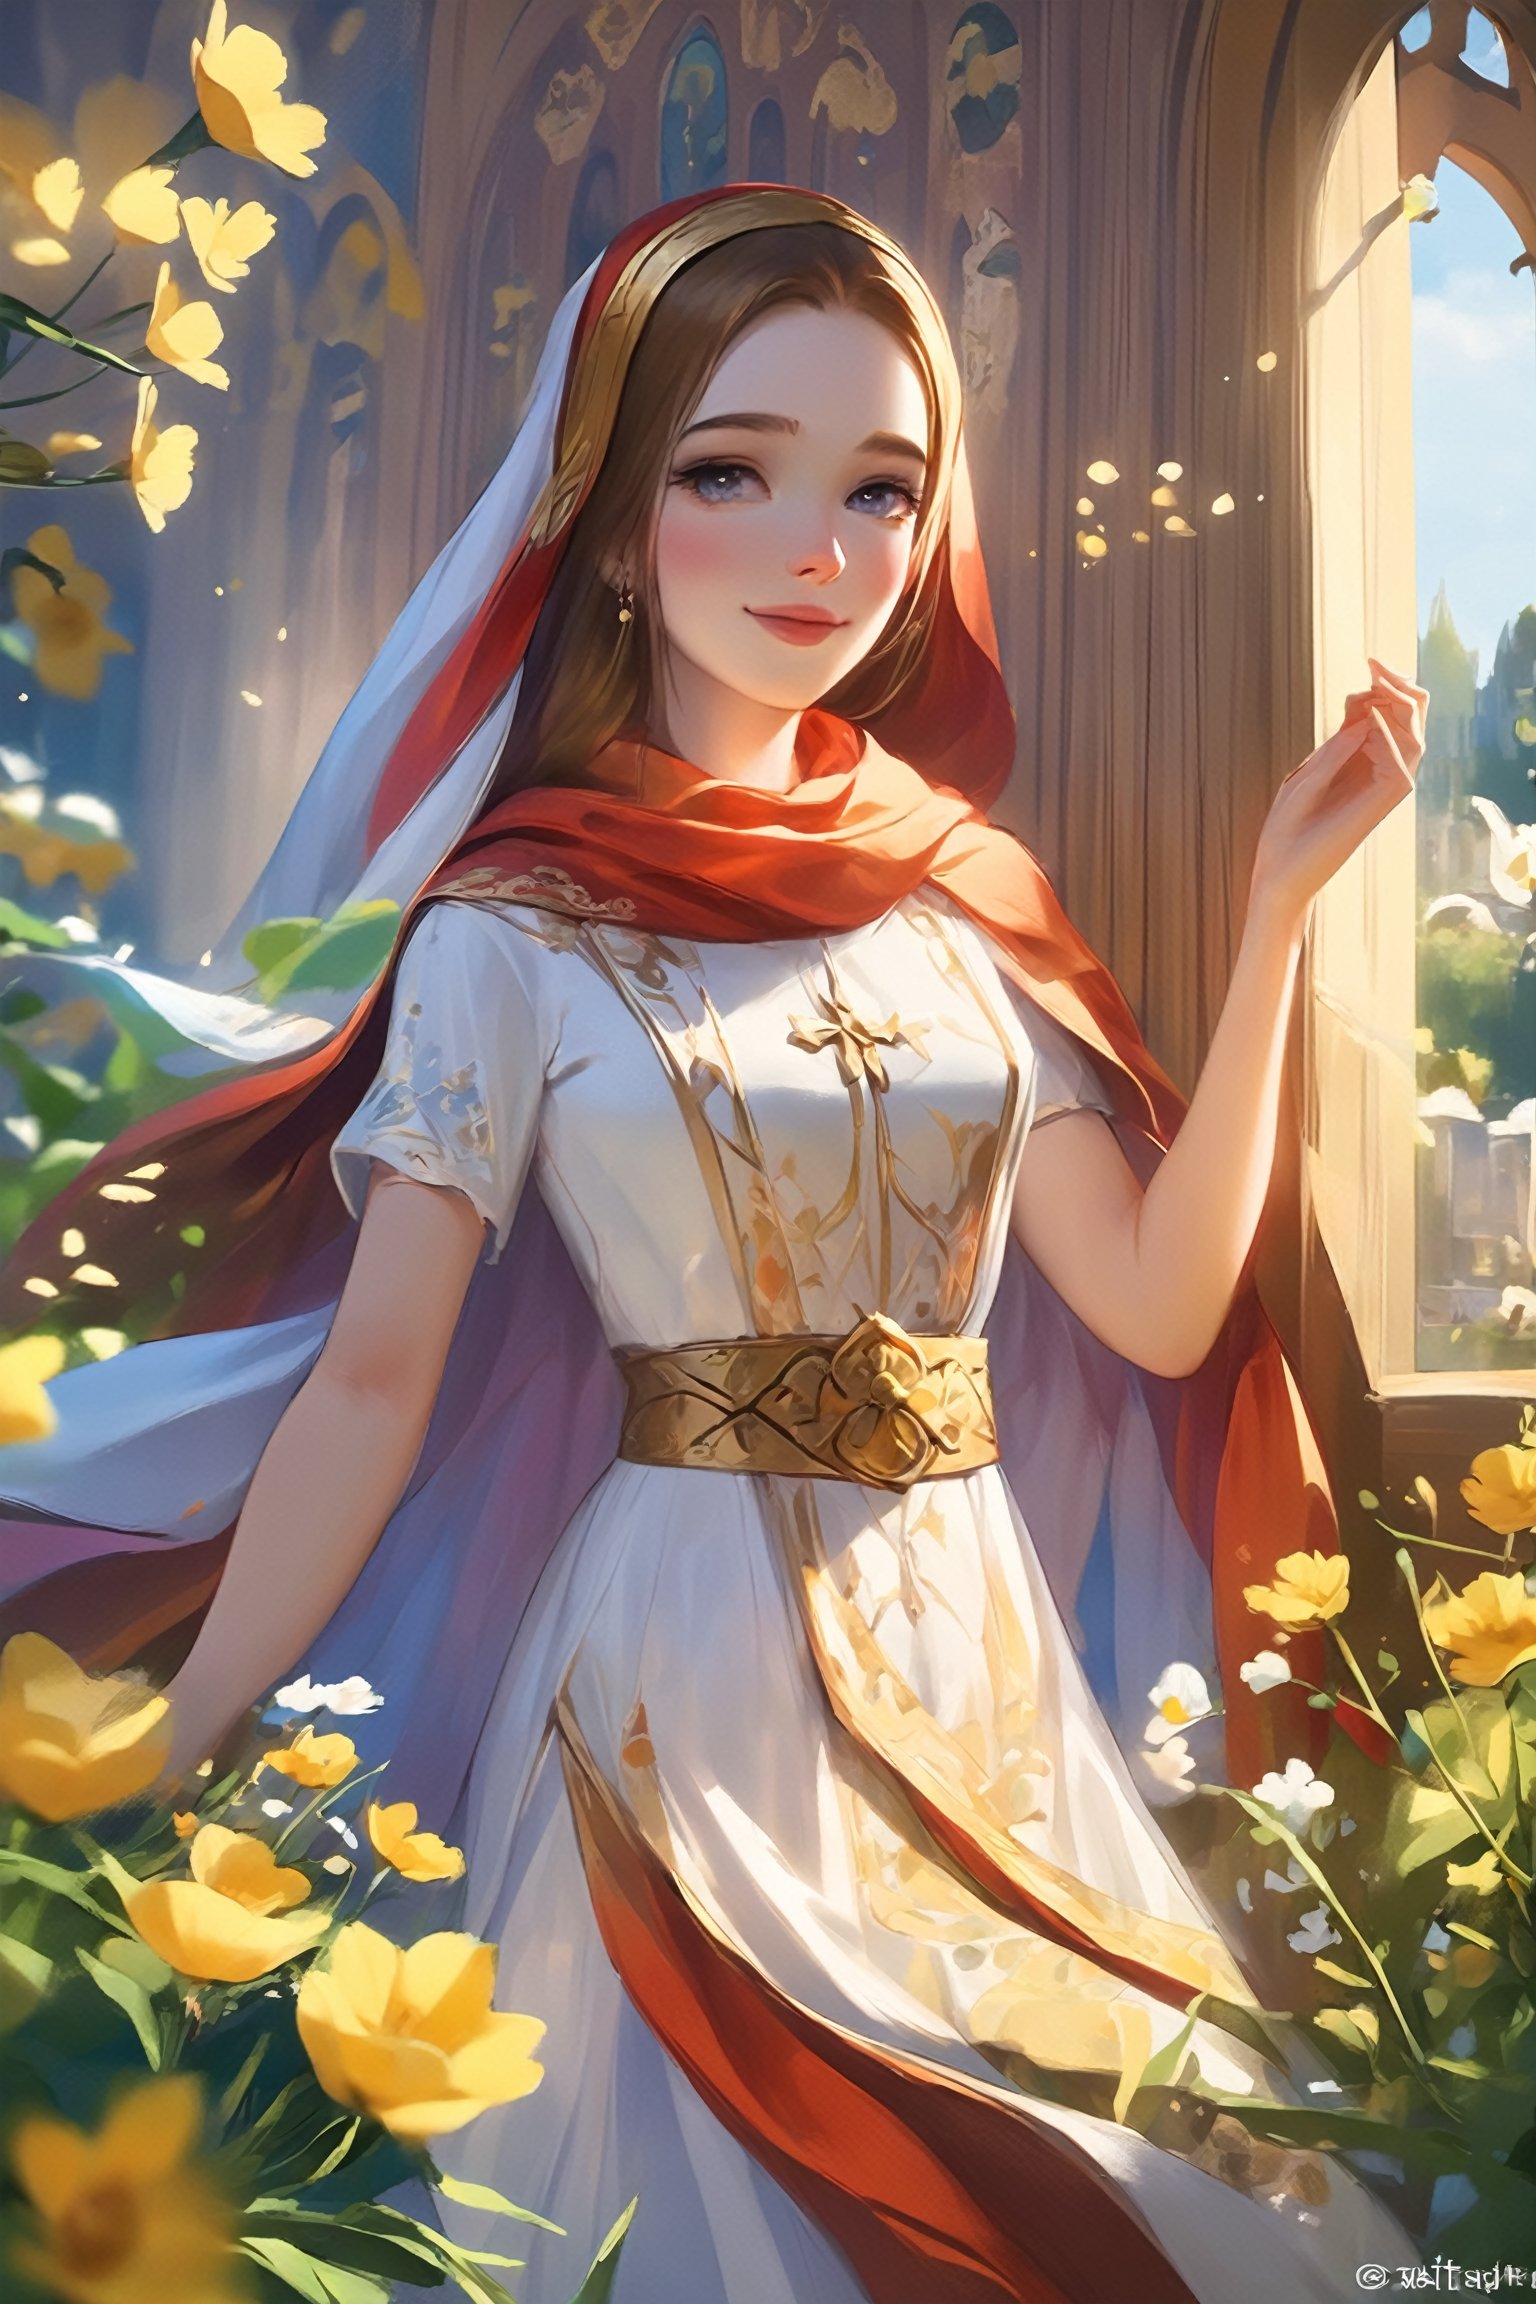 (1girl), a girl in an Orthodox church wears a modest scarf on her head, a long floor-length skirt with a pattern, beautiful girl smiles, beautiful eyes, high detail, clear face, light falls on her face, wildflowers, sunny day, voluminous lighting, soft morning light, sunlight glinting on her skin, Russian beauty (in color, color illustration), ((full body), low-key, sharp focus on subject, intricate environment scenery:1.1), (masterpiece, detailed, highres:1.4), (perfect feminine anatomy, perfect proportions, Perfect Hands:1.125), Sweeping cinematic lens flares, ultra crisp details, (f_stop 2.8), (focal_length 85mm f/2.8), K-Eyes, Perfect Hands, Wonder of Beauty, K-Eyes,Long Legs and Hot Body,<lora:EMS-248183-EMS:0.700000>,<lora:EMS-304982-EMS:0.800000>,<lora:EMS-231841-EMS:0.800000>